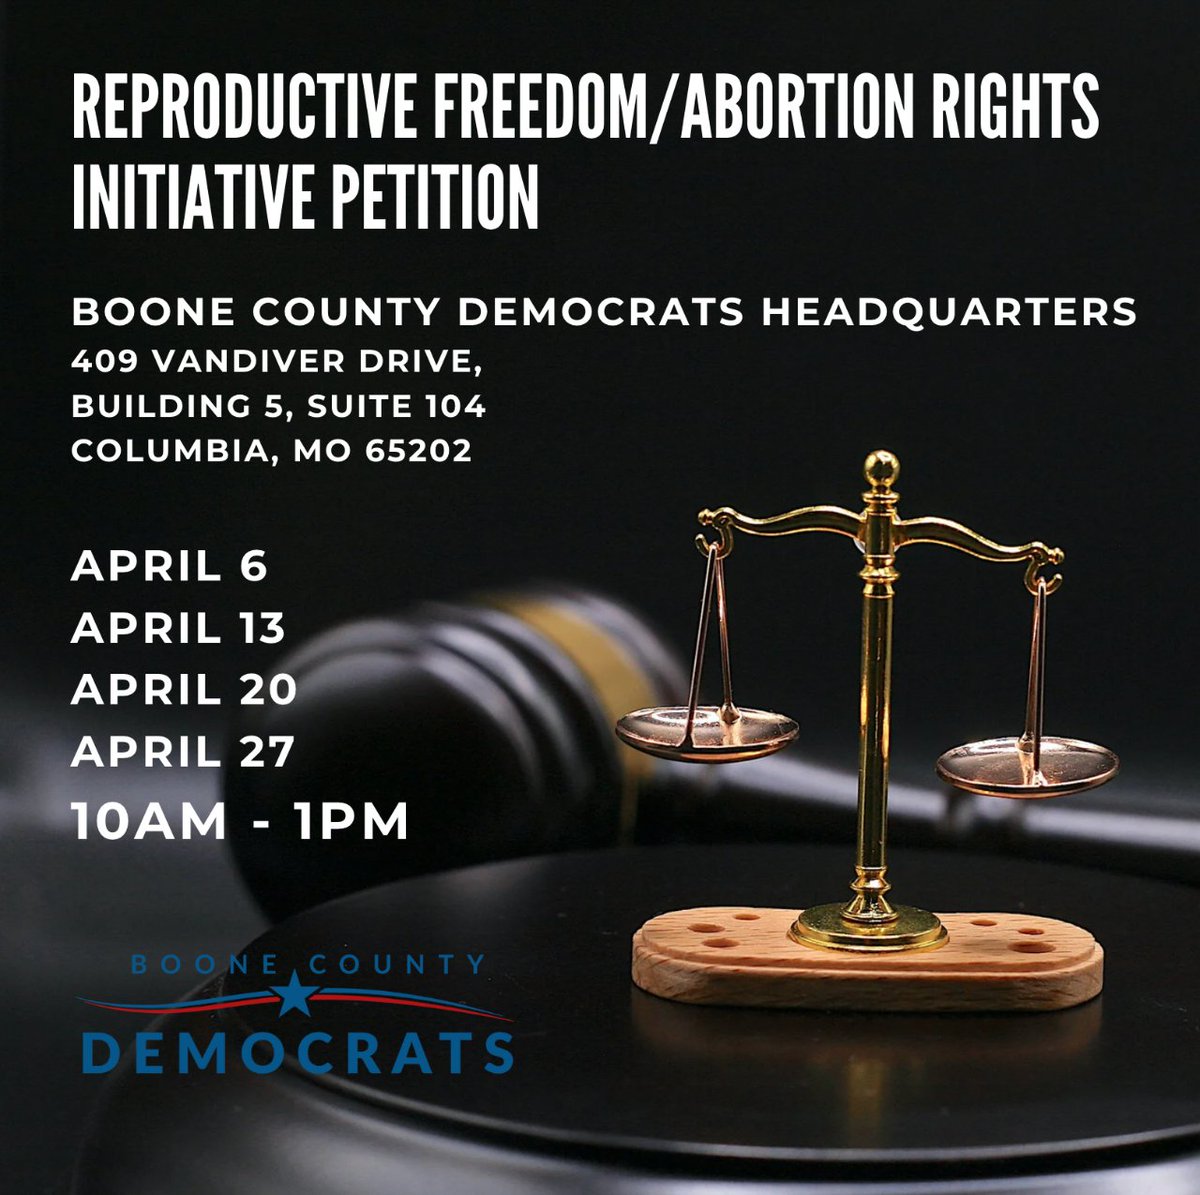 Drive Thru Reproductive Rights Initiative Petition Signing! Saturday 10am - 1pm  April 27 or come on inside our office 10am-1pm  to put abortion rights on the ballot this year! Help us reach our goal before the deadline at the start of May!